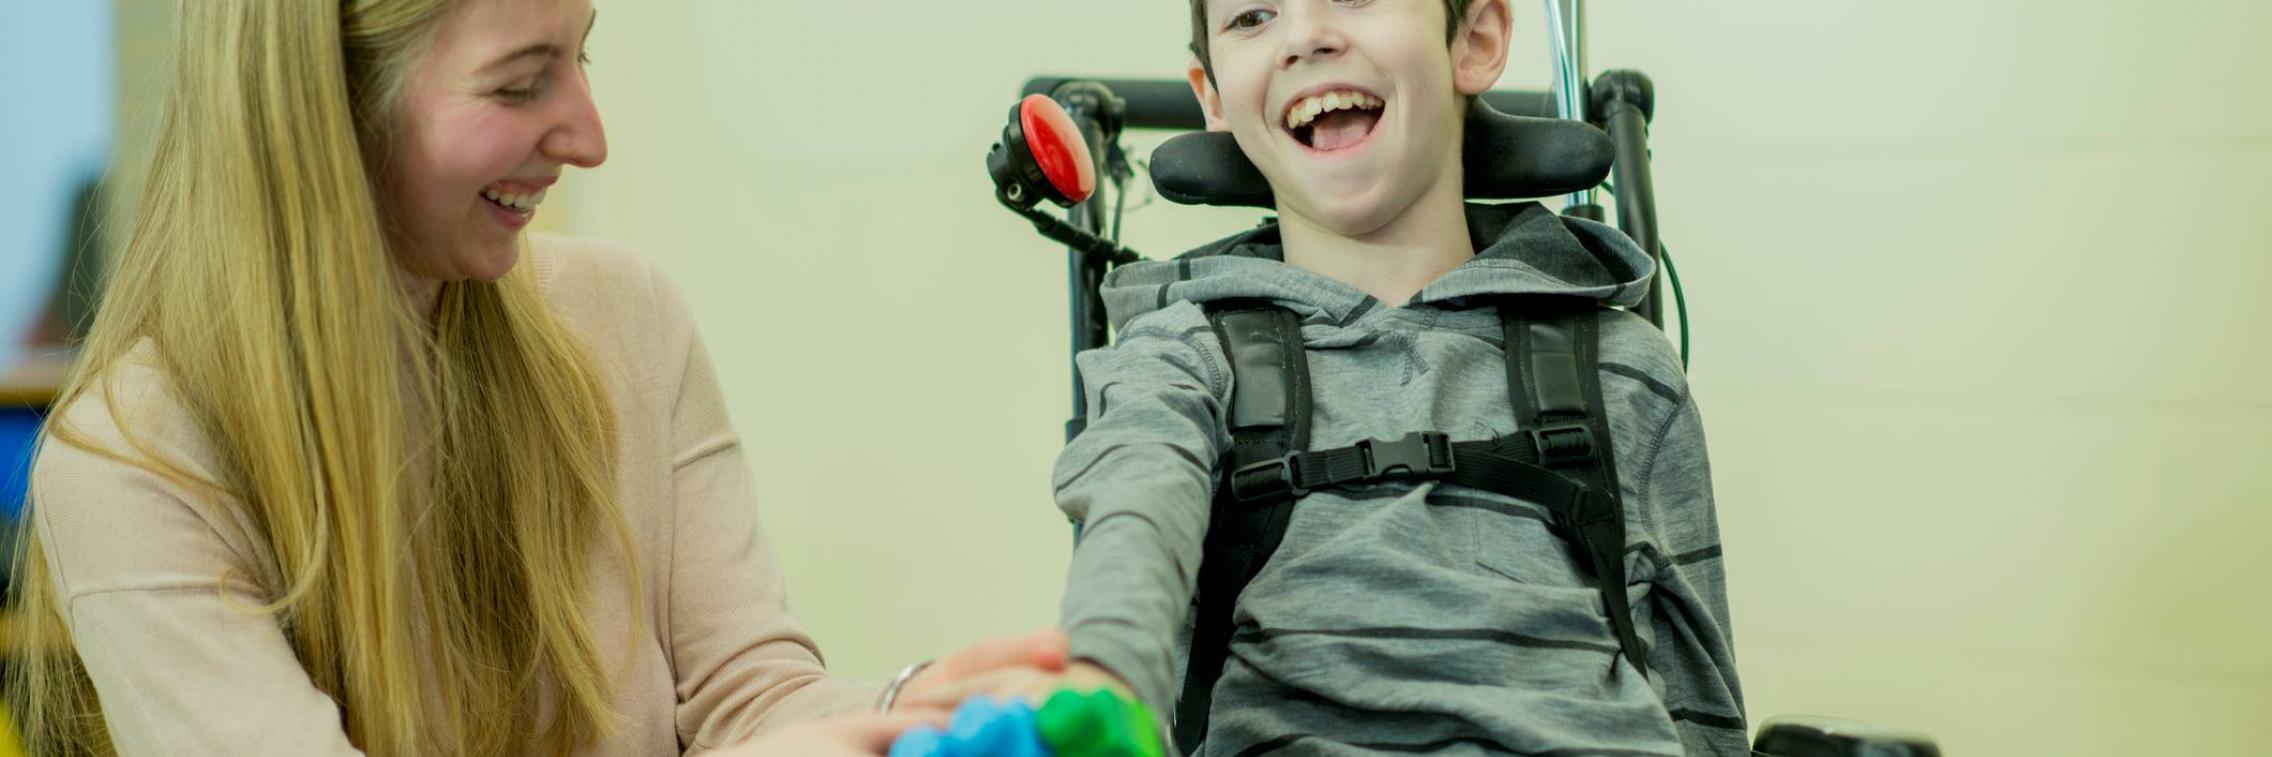 Women and a boy with cerebral palsy interacting